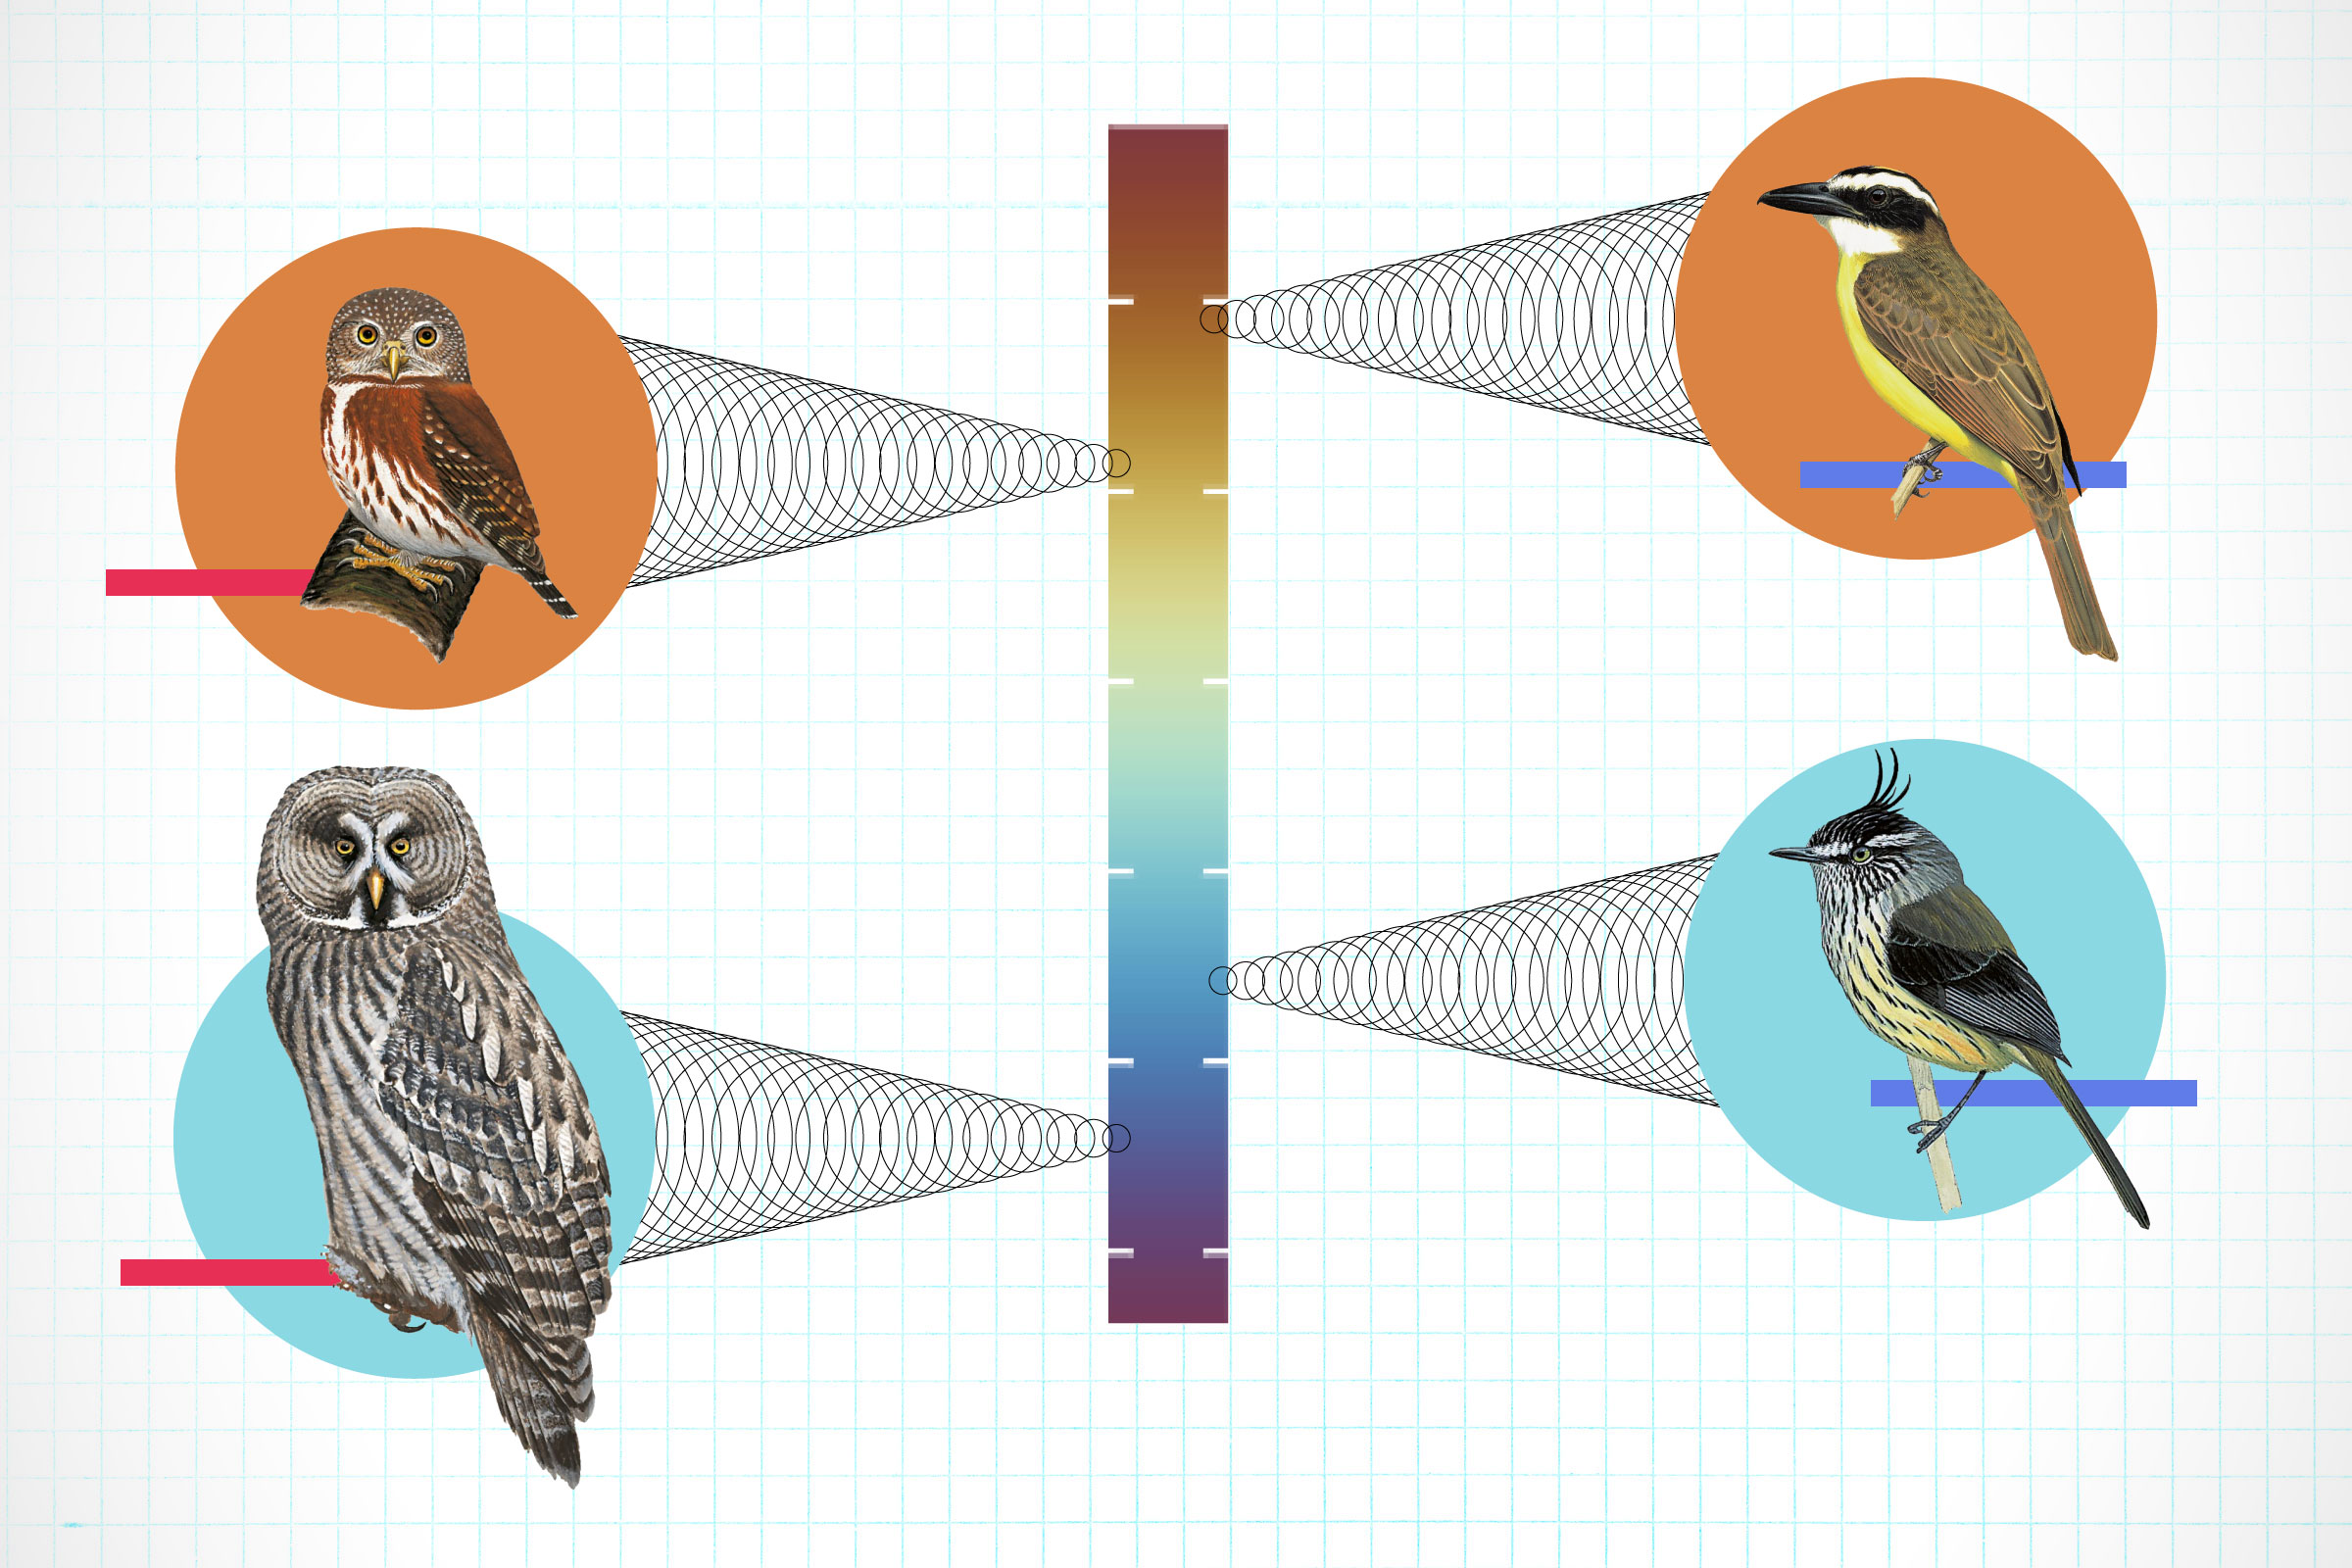 Imaging showing bird species and where they fall on the temperature gradient